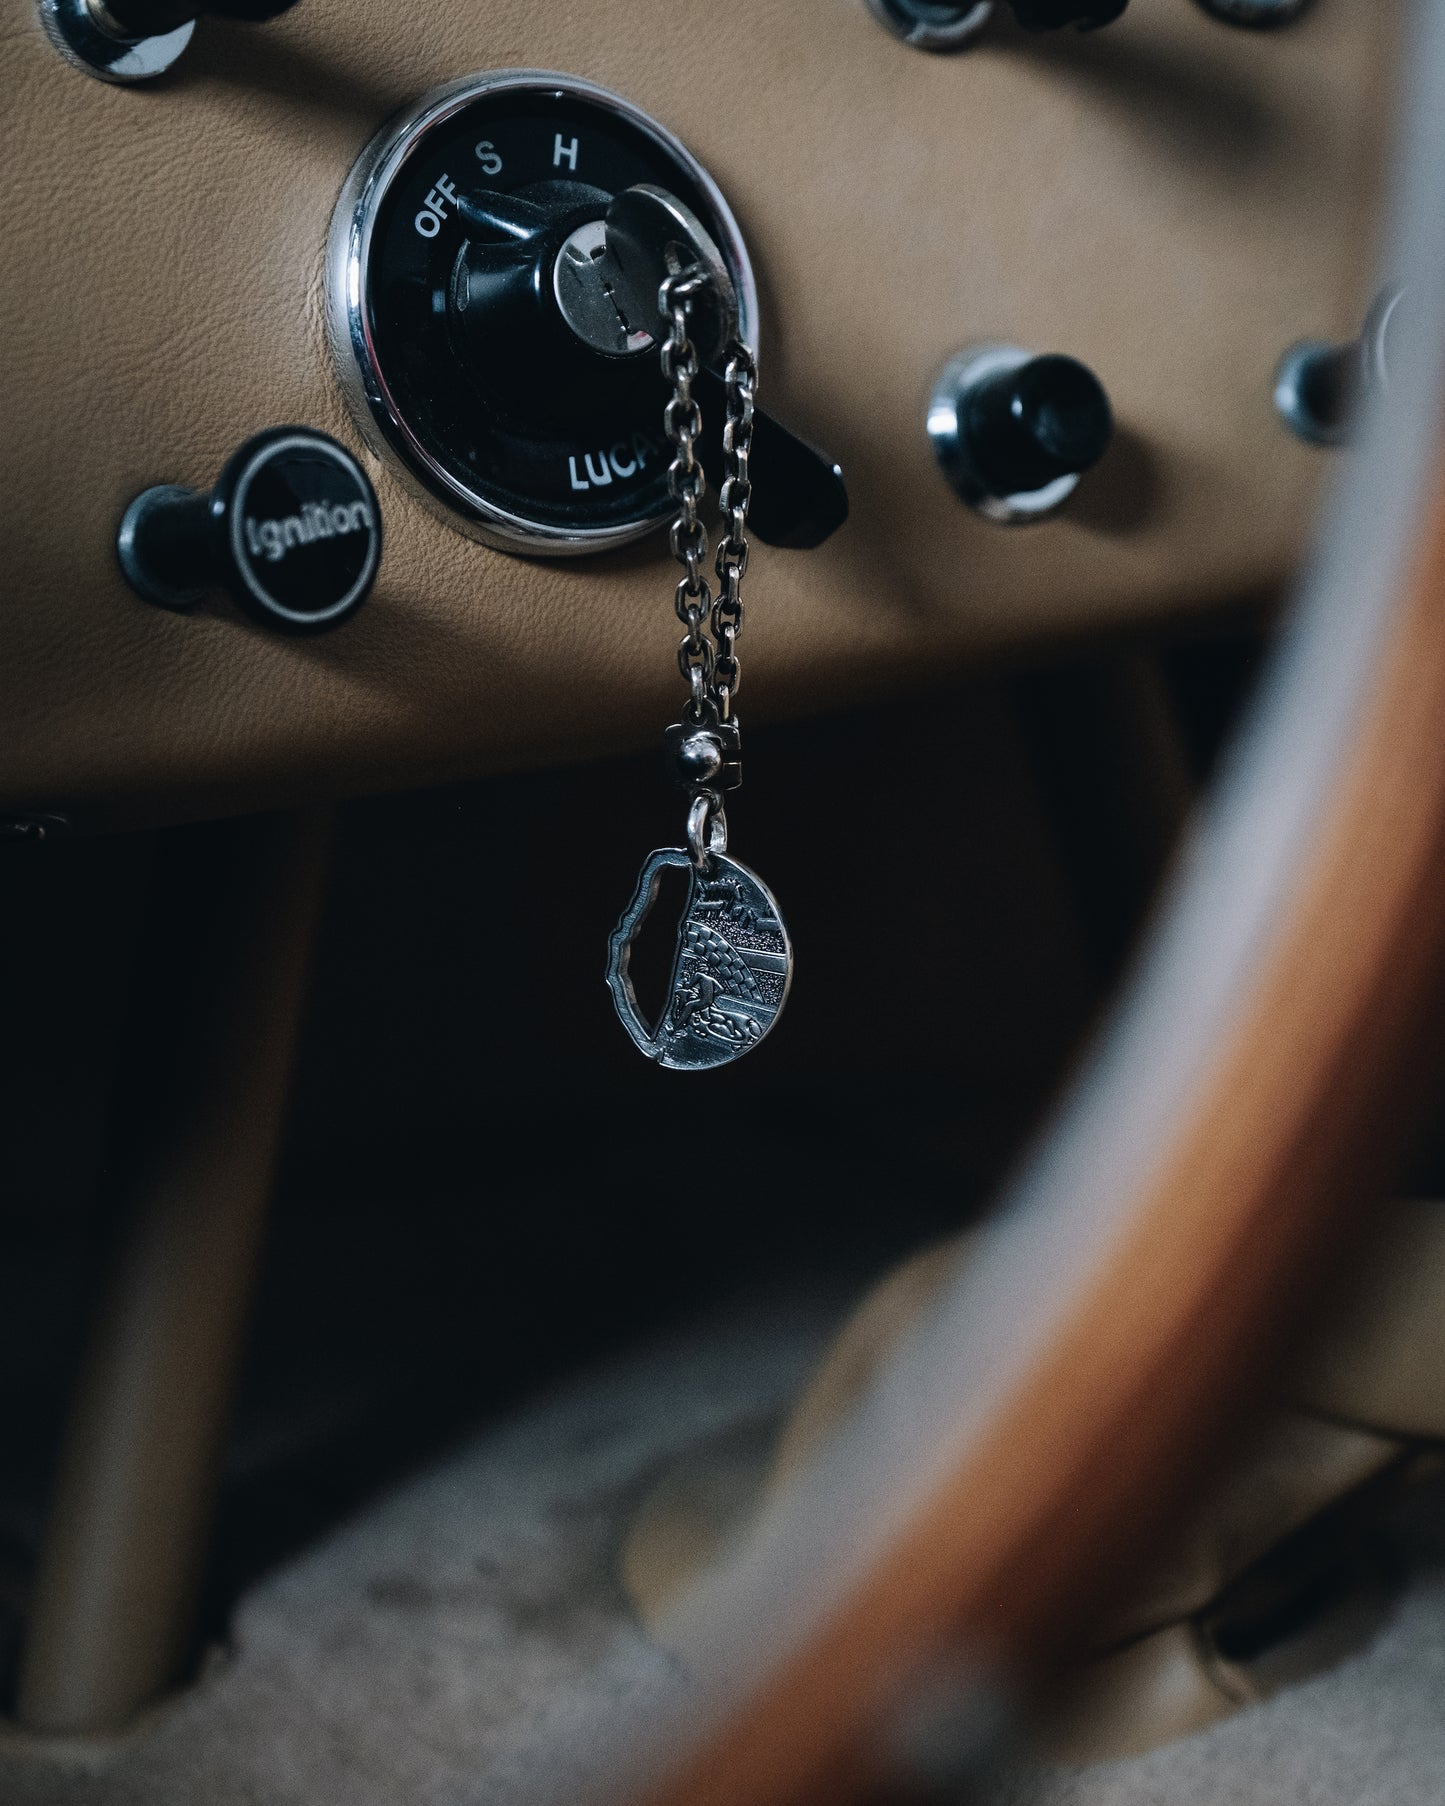 100th Anniversary 24H Le Mans | keychain King Nerd x The Mechanists